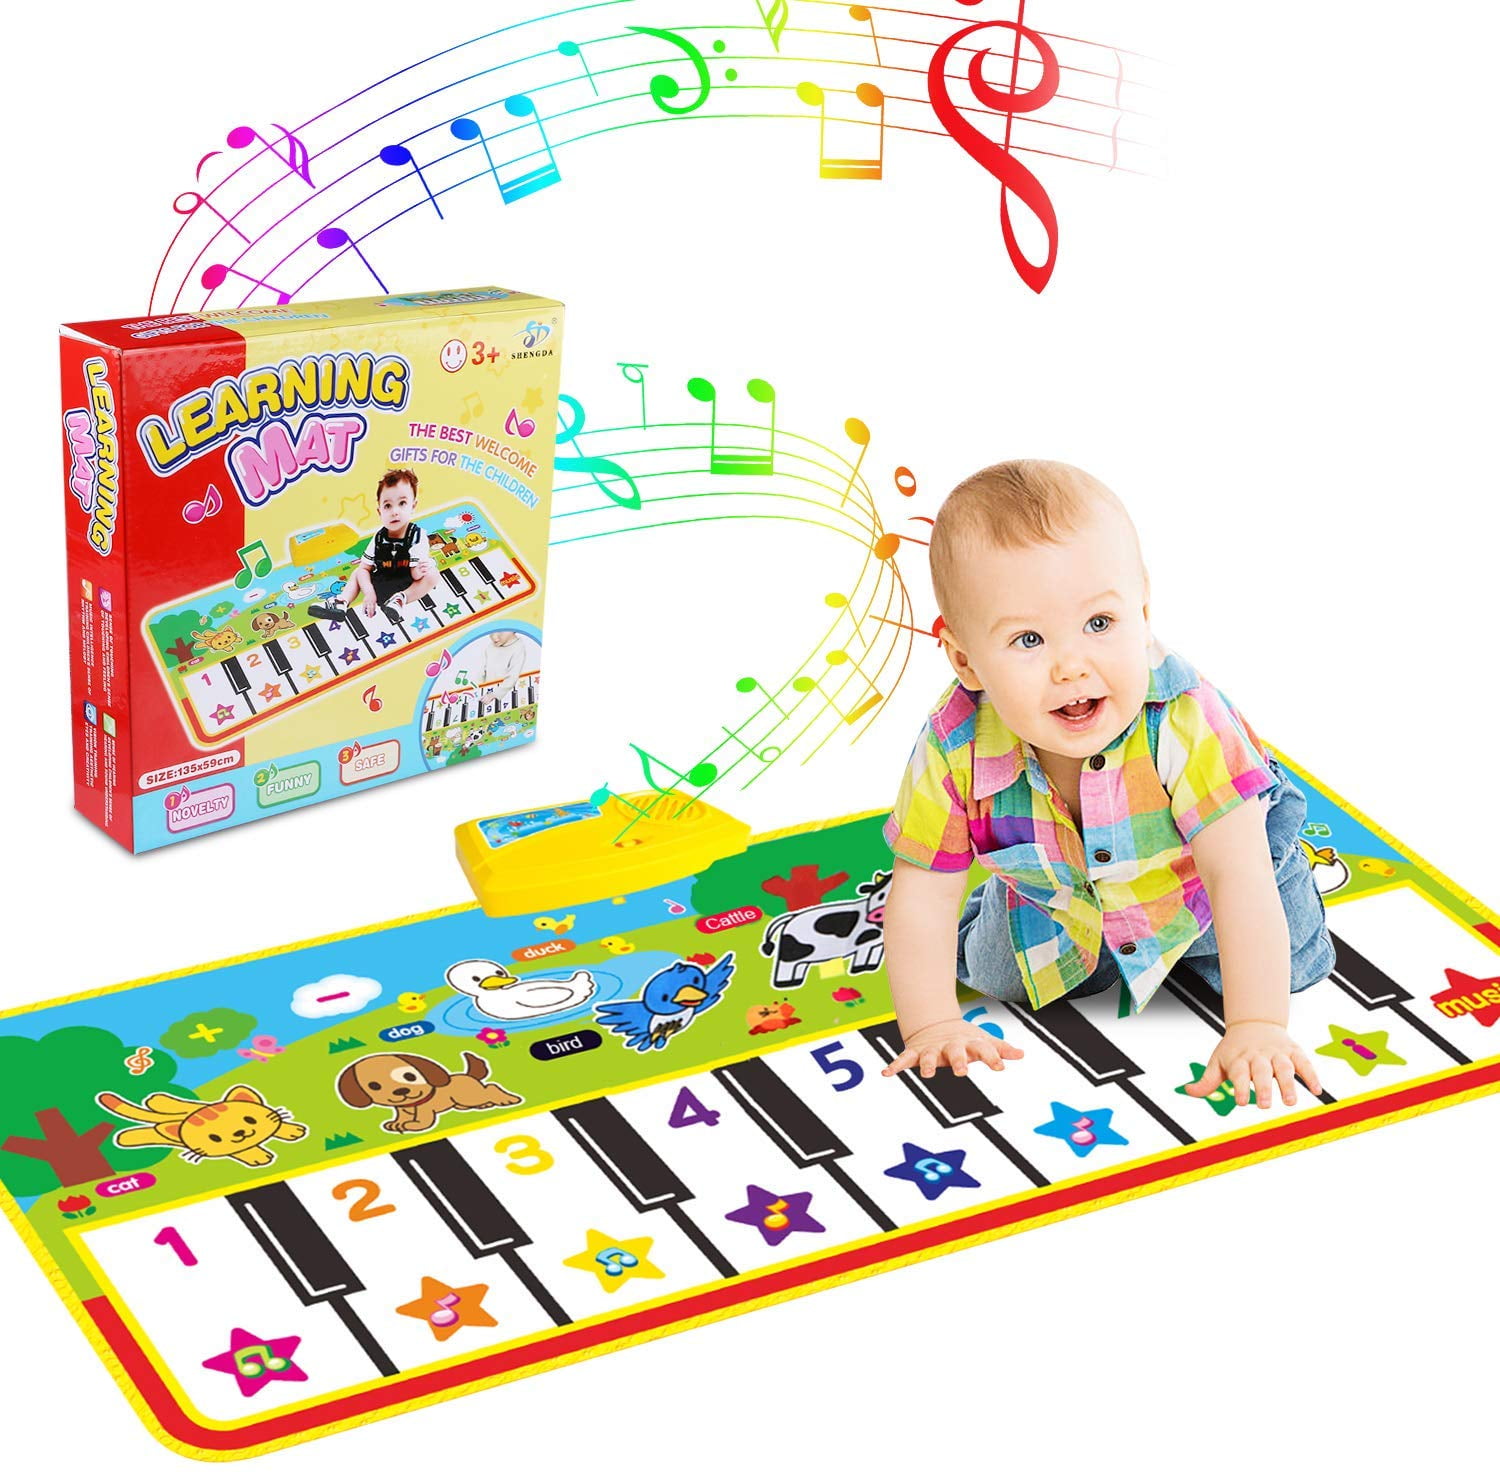 Toddler Musical Piano Mat Floor Piano Animal Interactive Music Mat Toys Baby Early Education Music Piano Keyboard Carpet Animal Blanket Touch Play Safety Learn Kids Electronic Music Singing Dancing Toy 39” X 14 